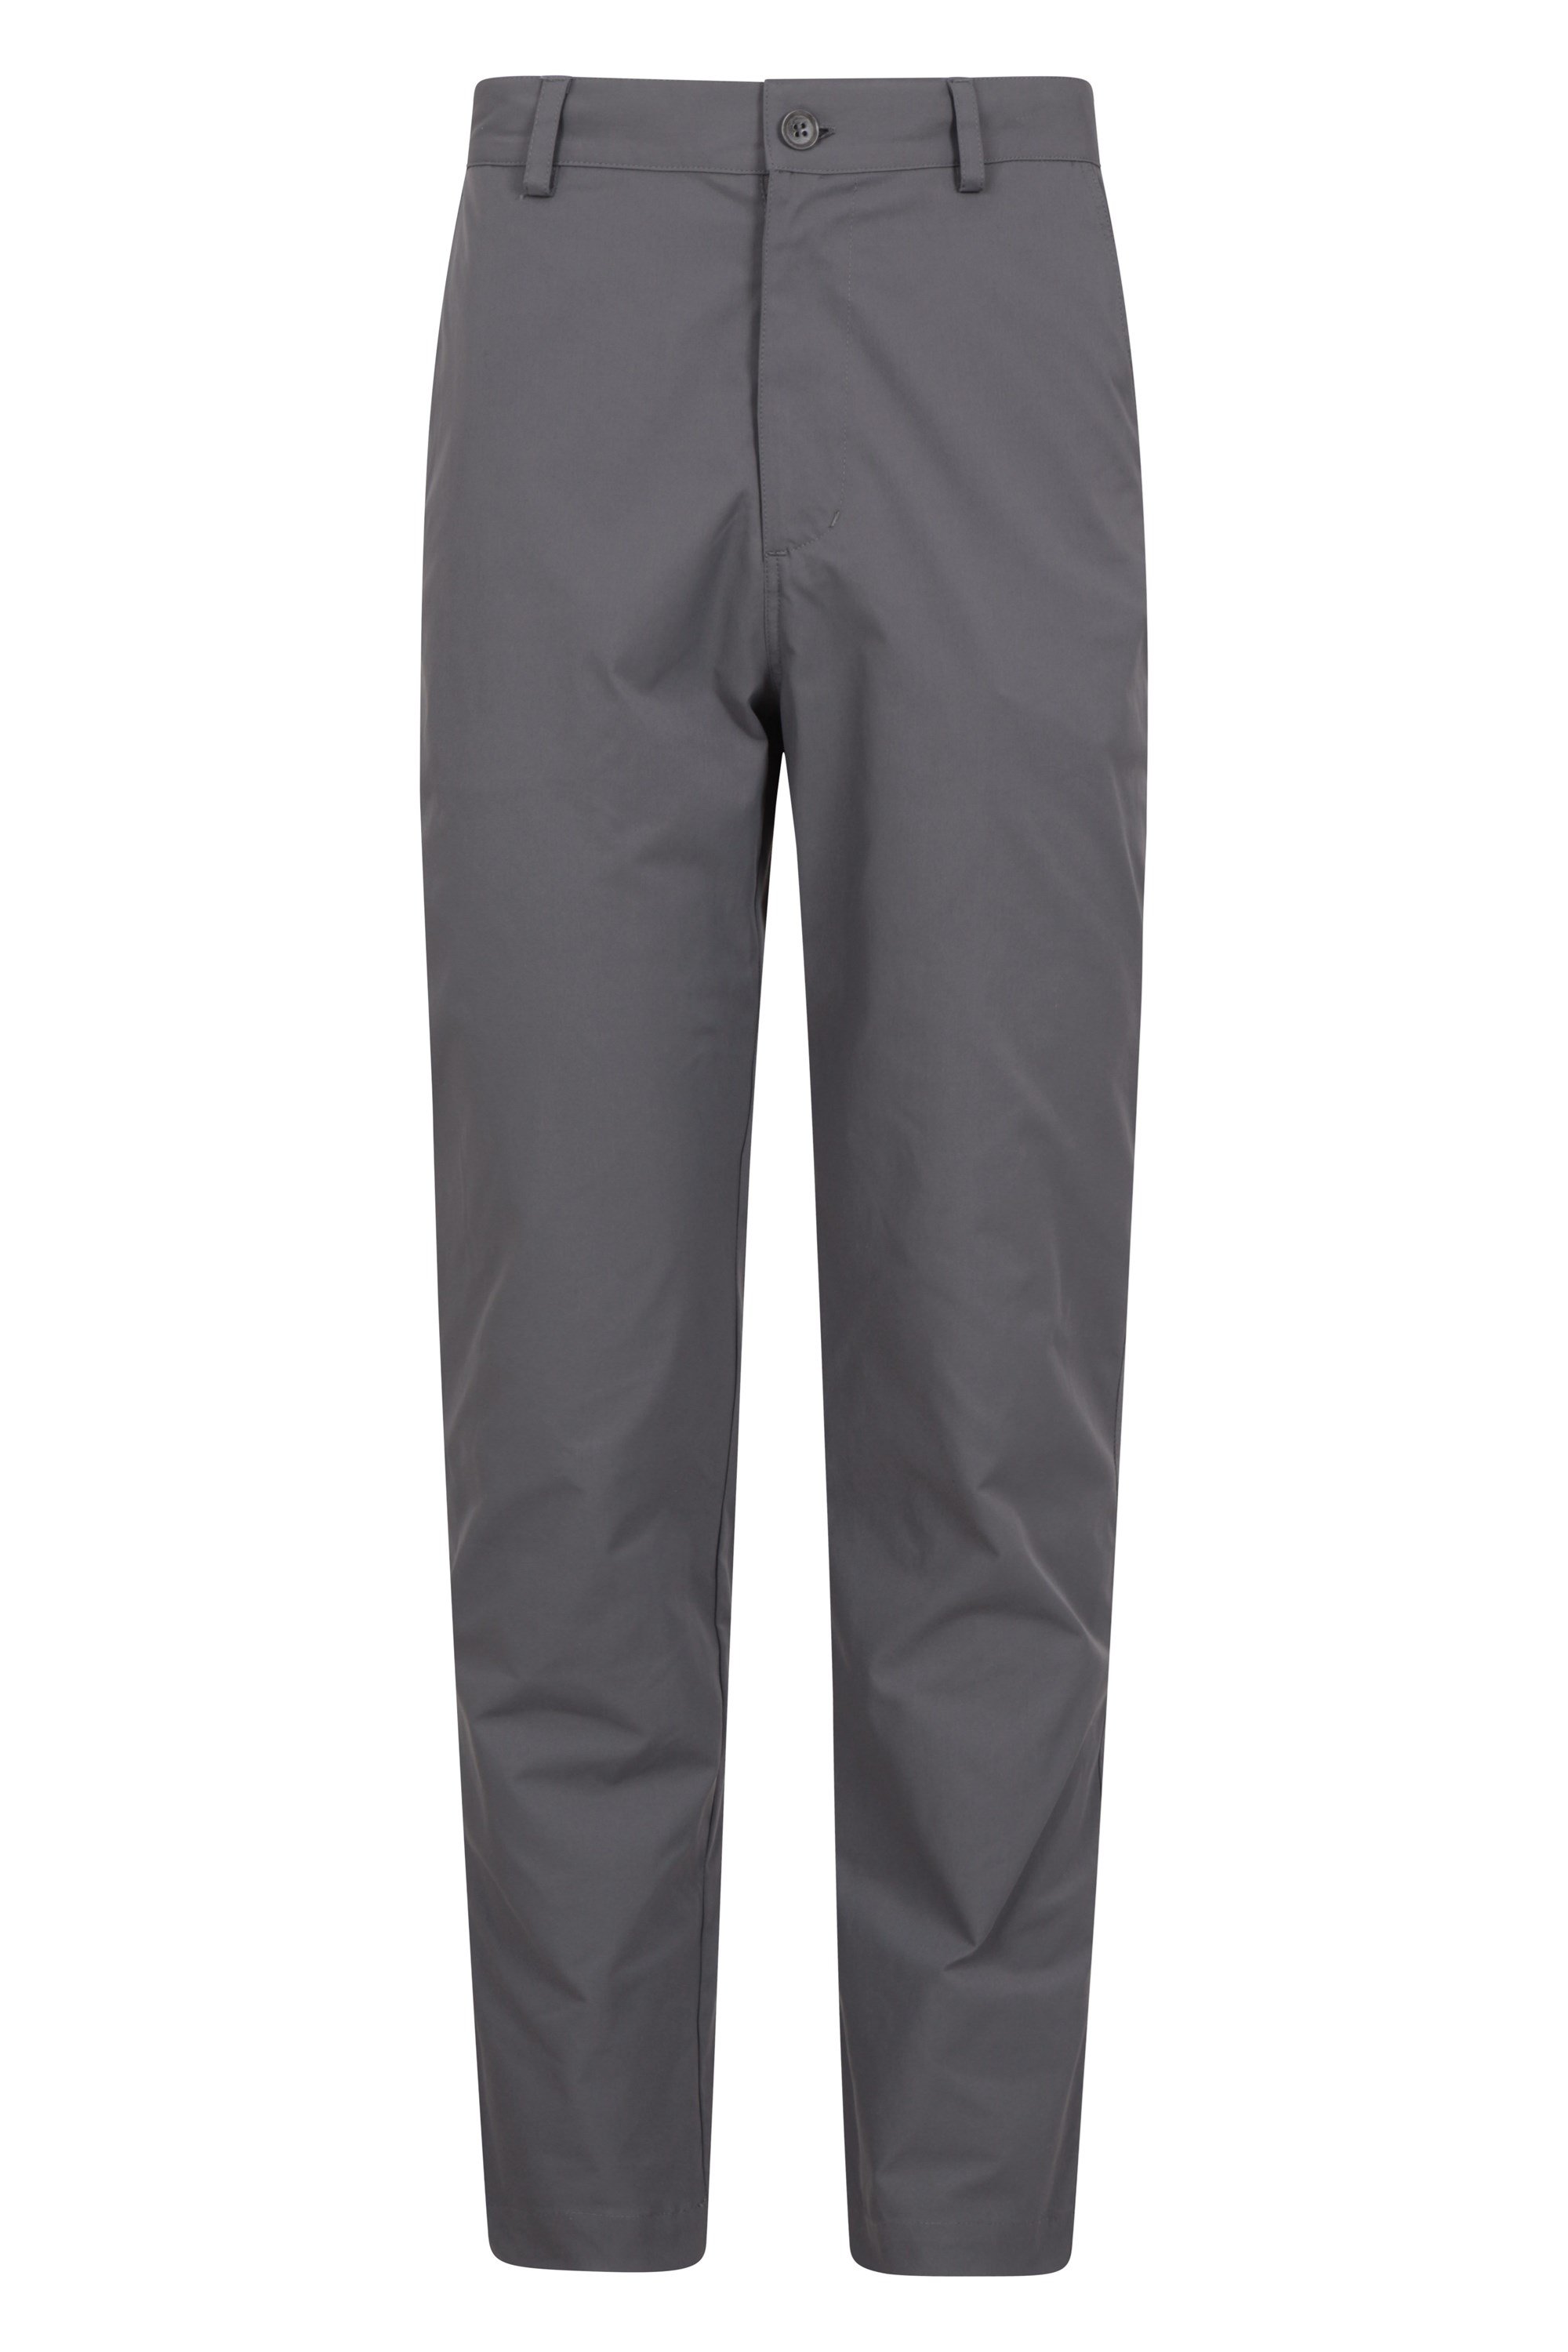 Adventure Mens Water Resistant Chino Trousers - Short Length - Grey